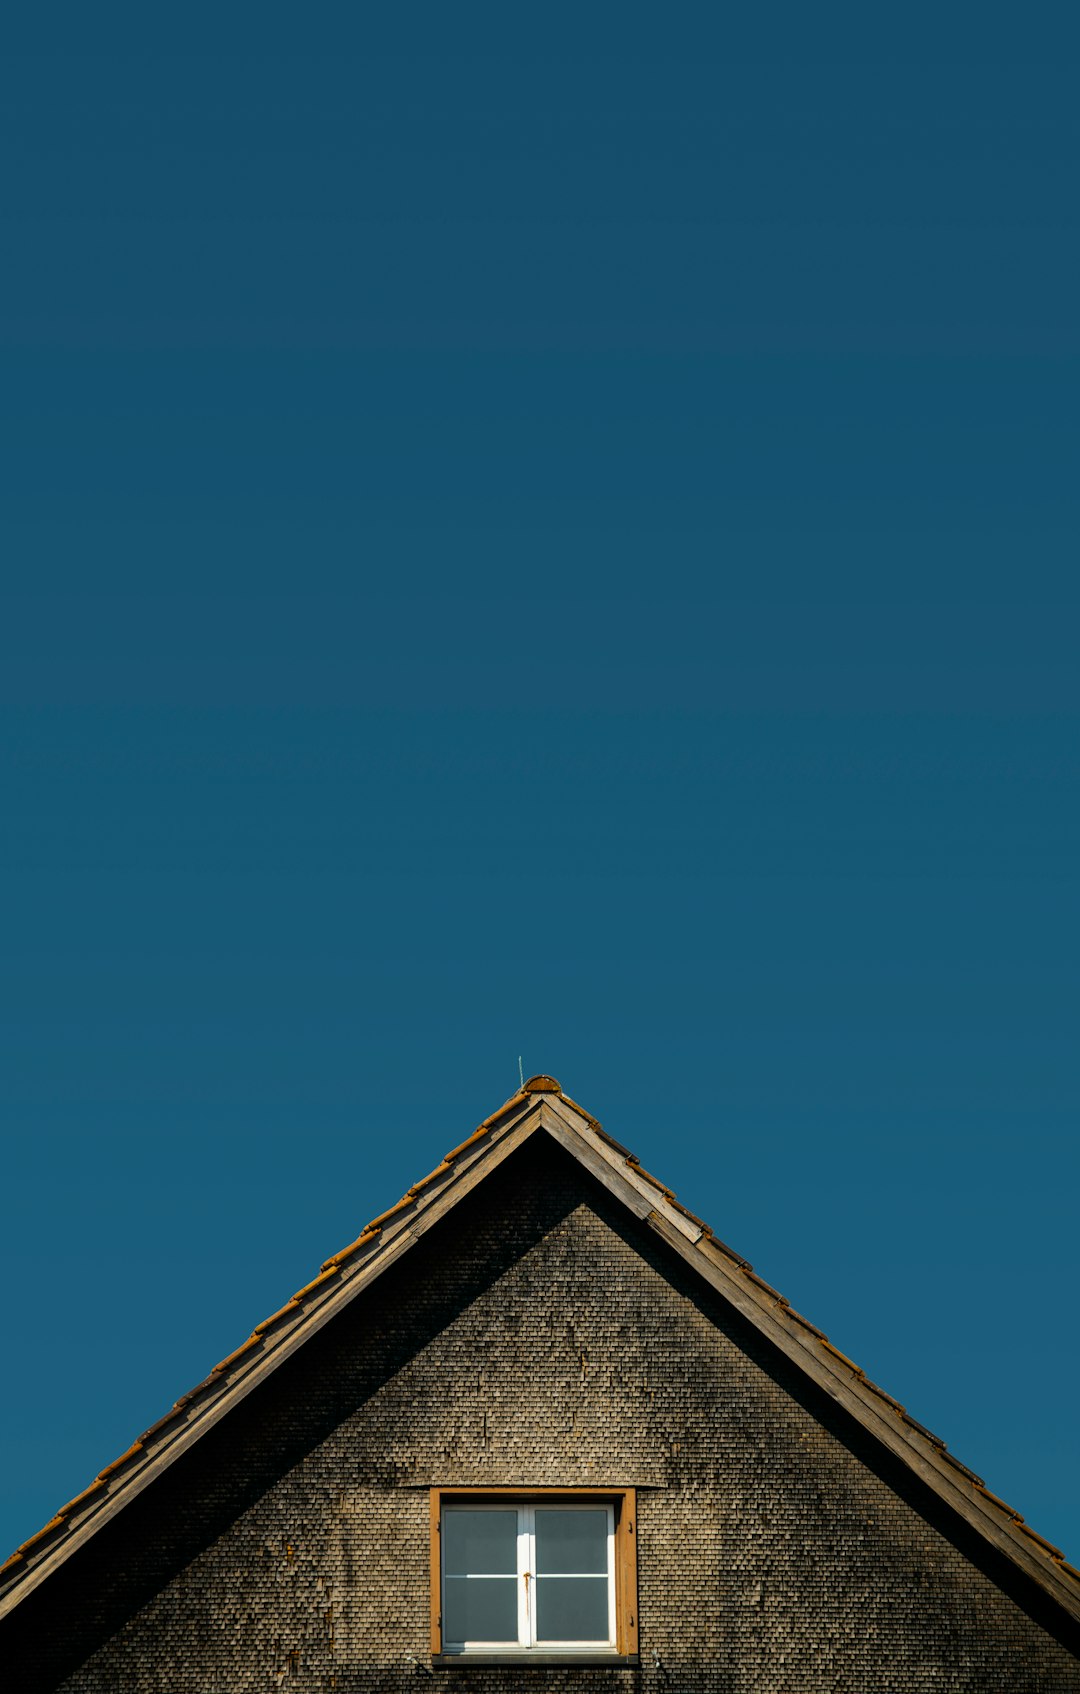 brown and gray house under blue sky during daytime